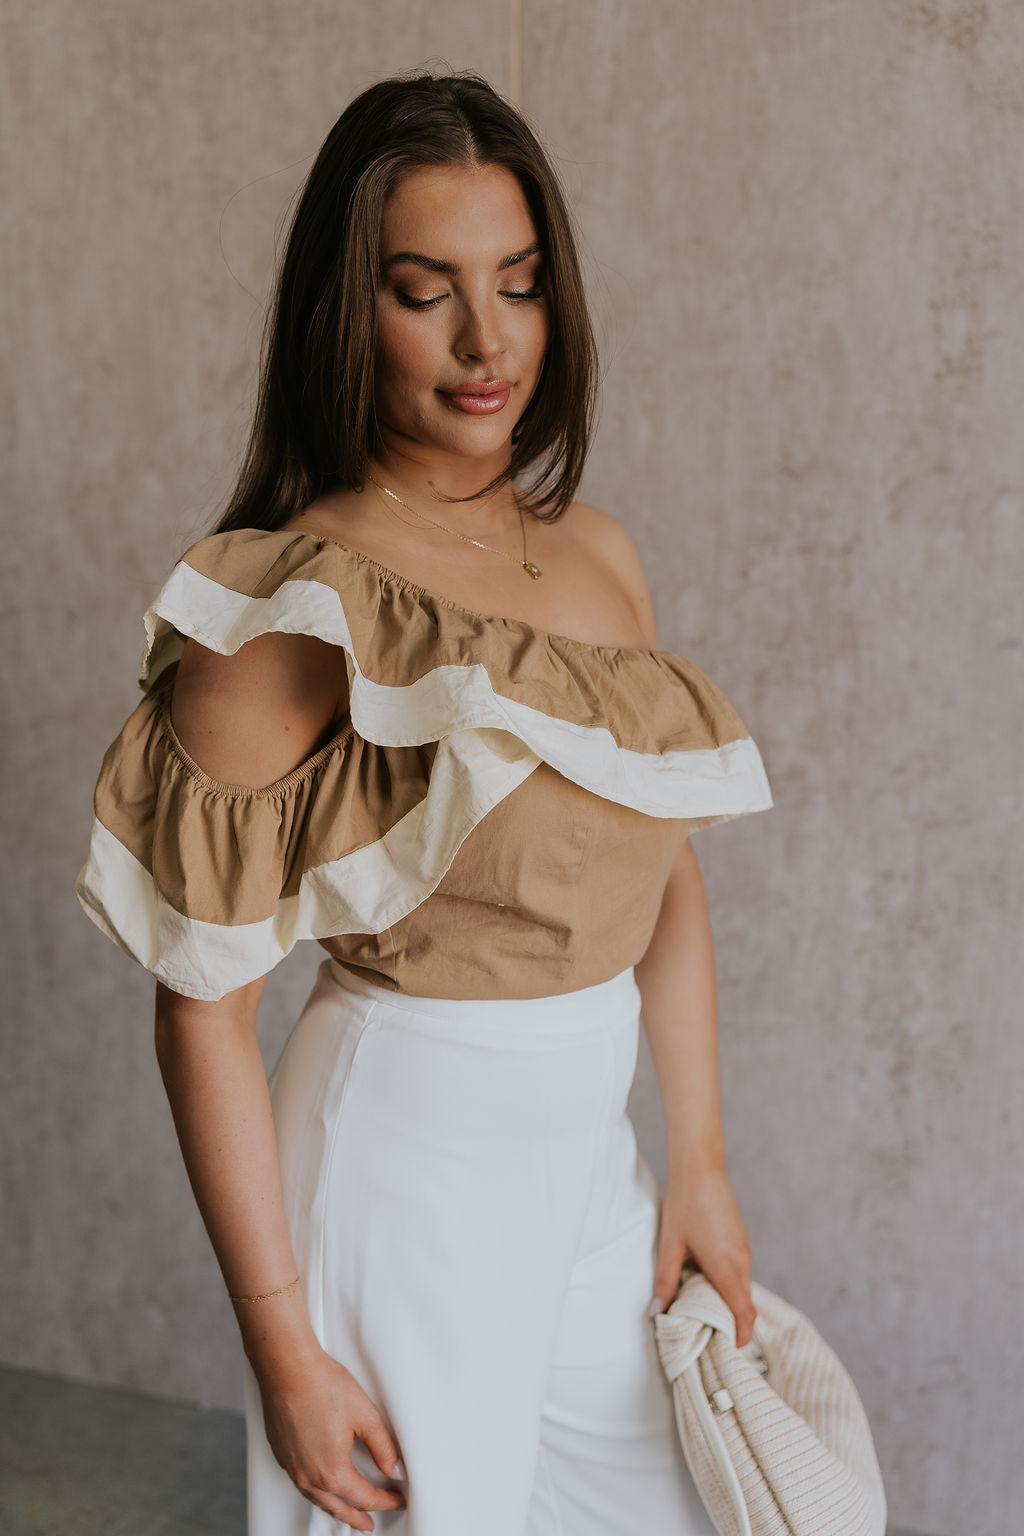 Side view of female model wearing the Rosalie Khaki & Cream Ruffle One-Shoulder Top which features Brown and Cream Lightweight Fabric, Cropped Waist, Side Zipper with Hook Closure, One-Shoulder Ruffle Strap and Sleeveless